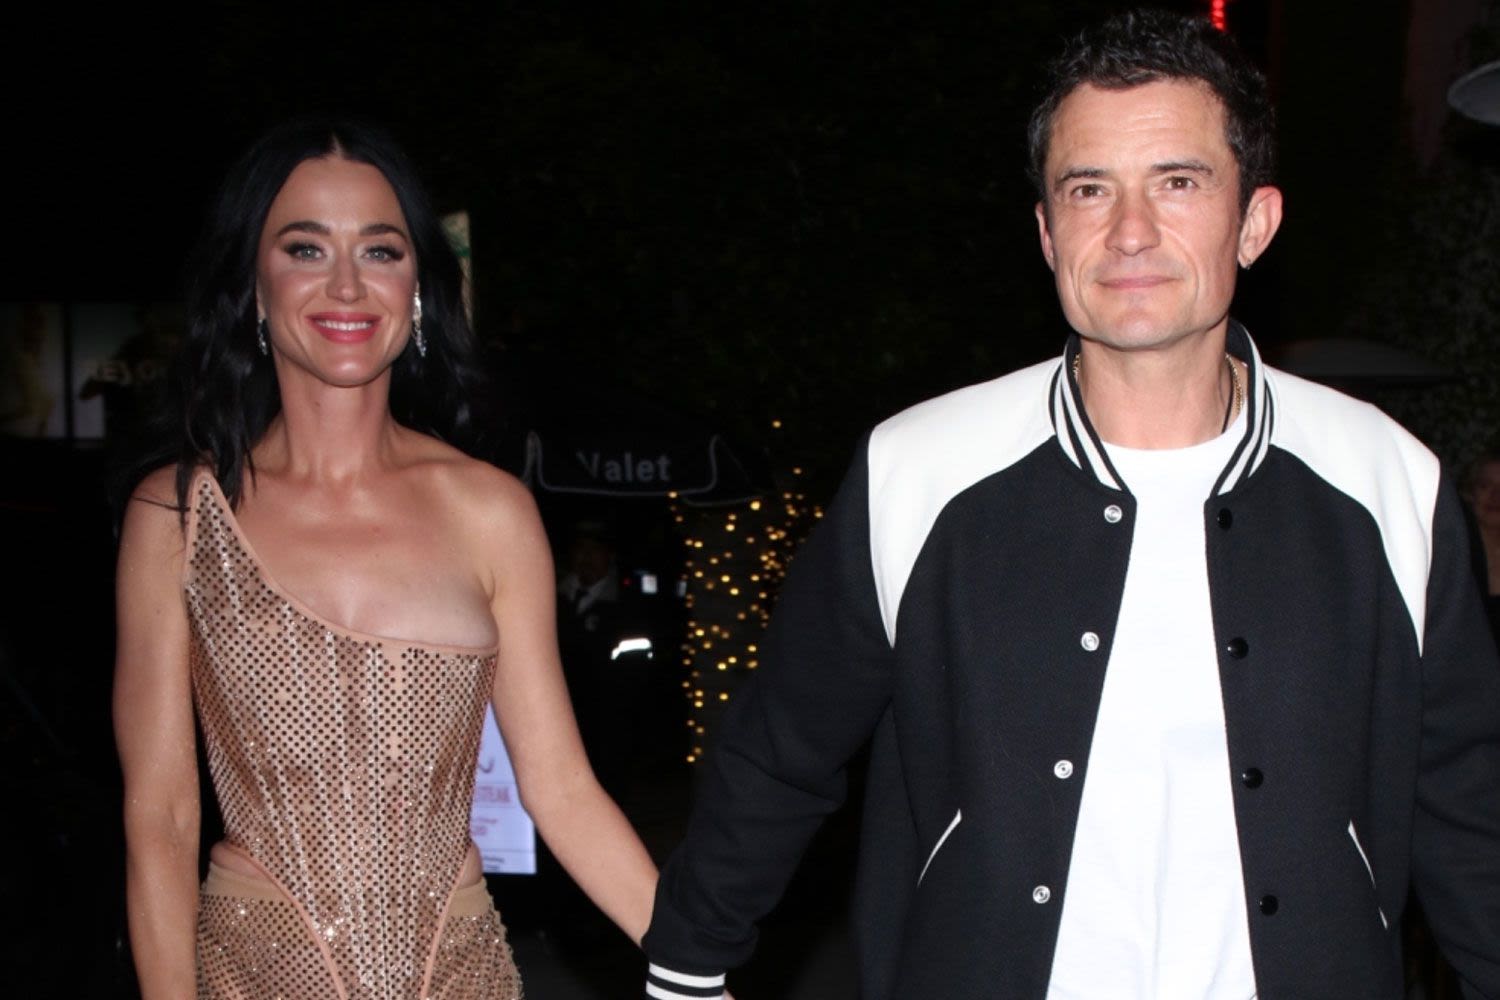 Katy Perry Holds Hands with Orlando Bloom as They Leave 'American Idol' Season Finale Afterparty